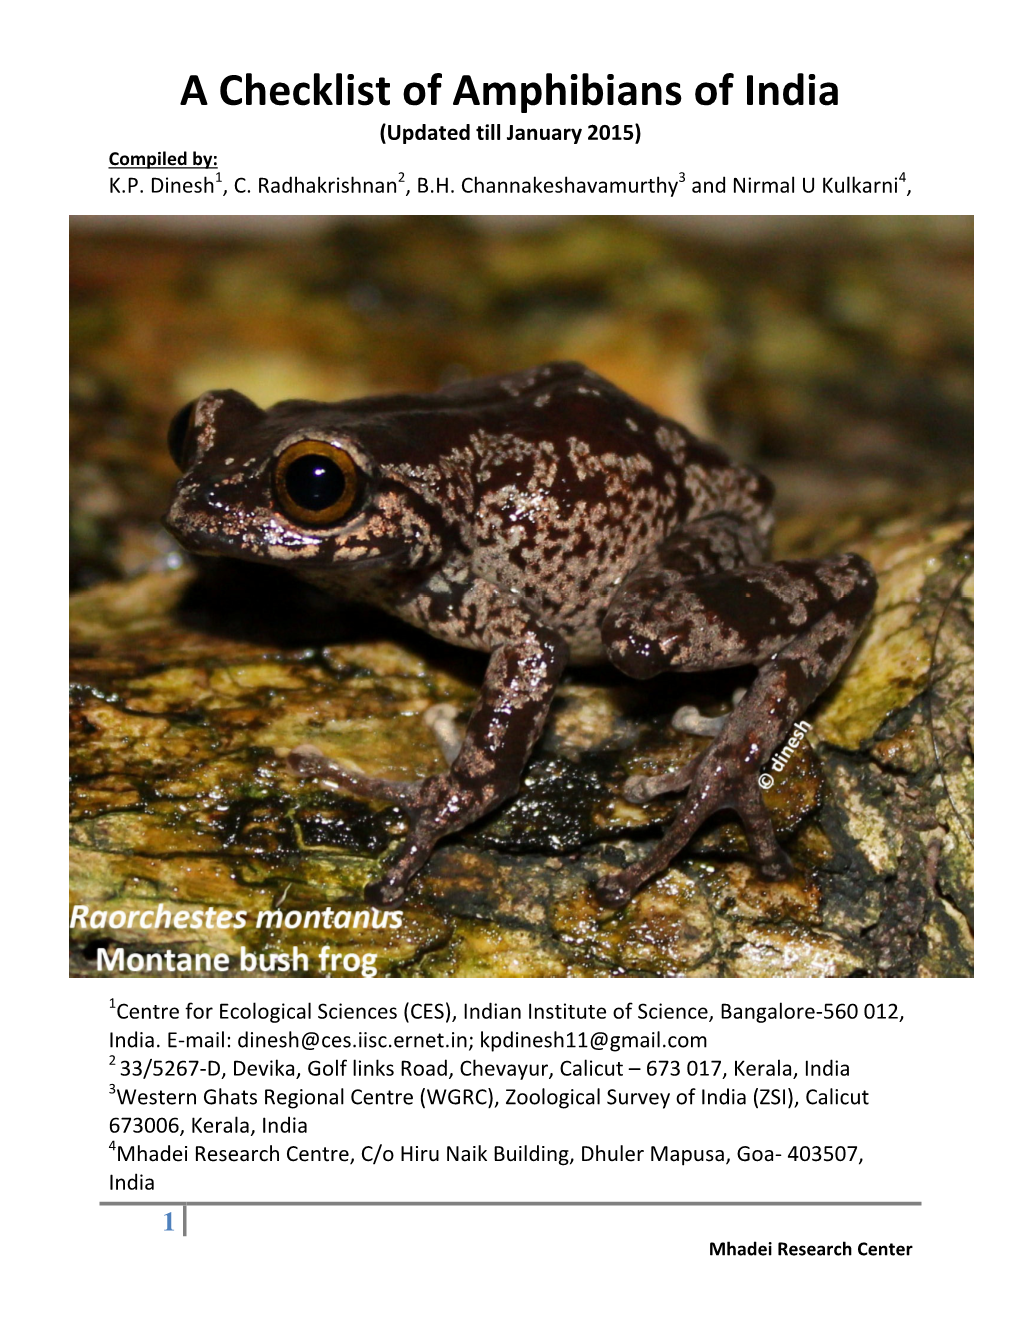 A Checklist of Amphibians of India (Updated Till January 2015) Compiled By: K.P